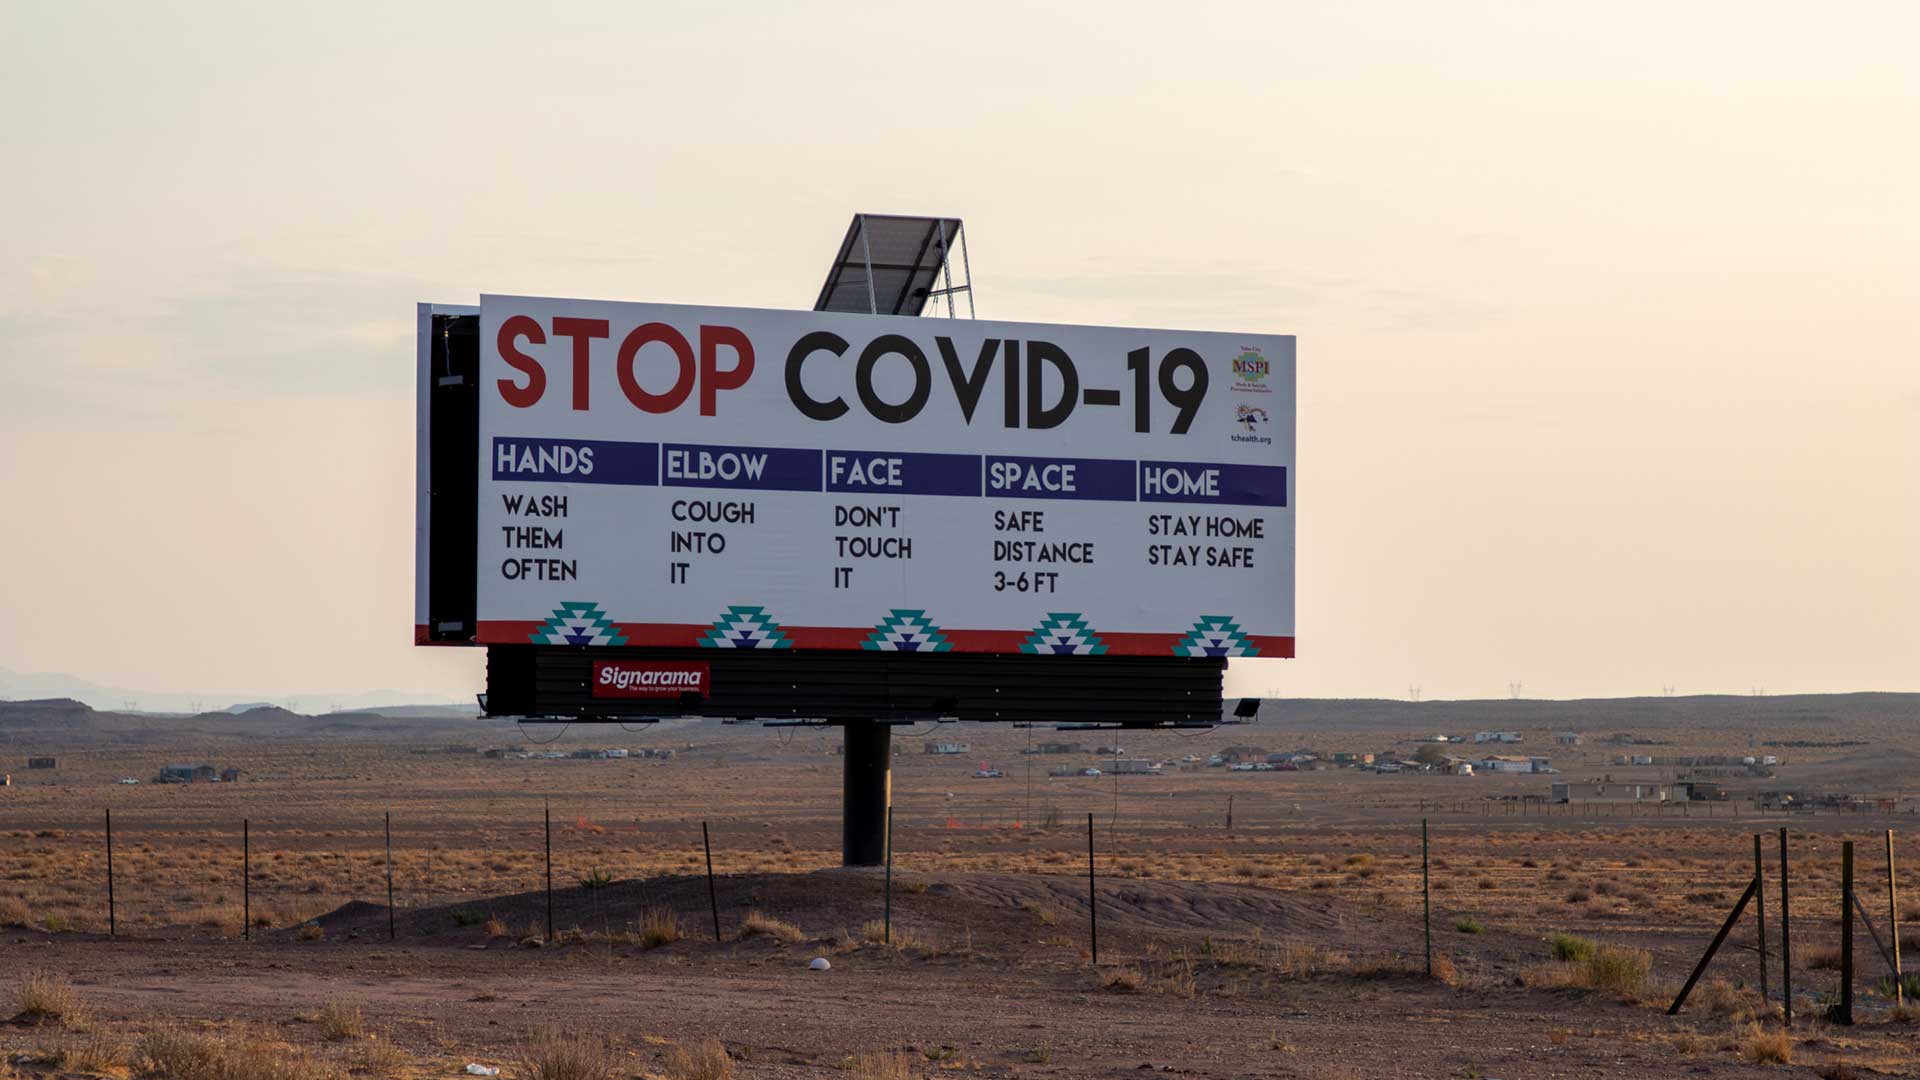 Legislation making its way through Congress aims to reaffirm that tribal epidemiology centers should have access to state and federal health data. Tribal leaders have had trouble accessing information to help fight COVID-19 and other diseases in places like the Navajo Nation, where this sign stands.